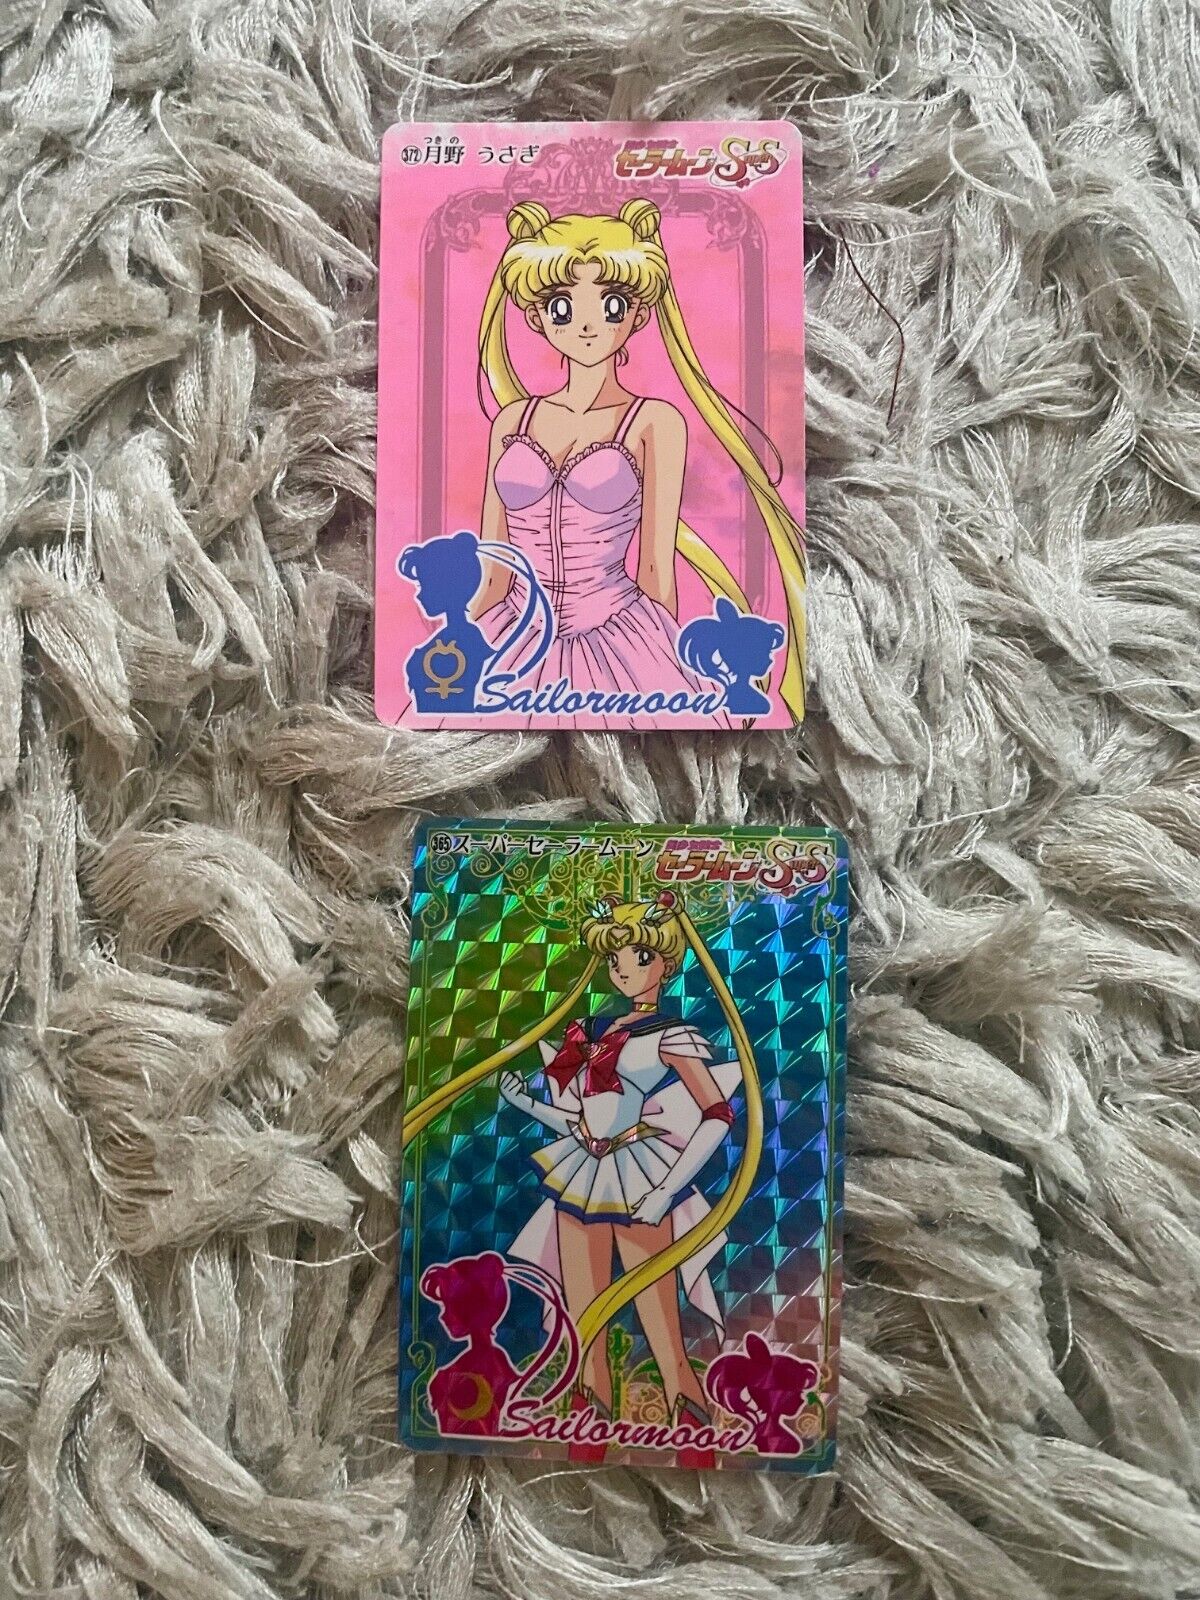 Set of 20 Bandai Sailor Moon Trading Cards, 1995. Including 1 holographic